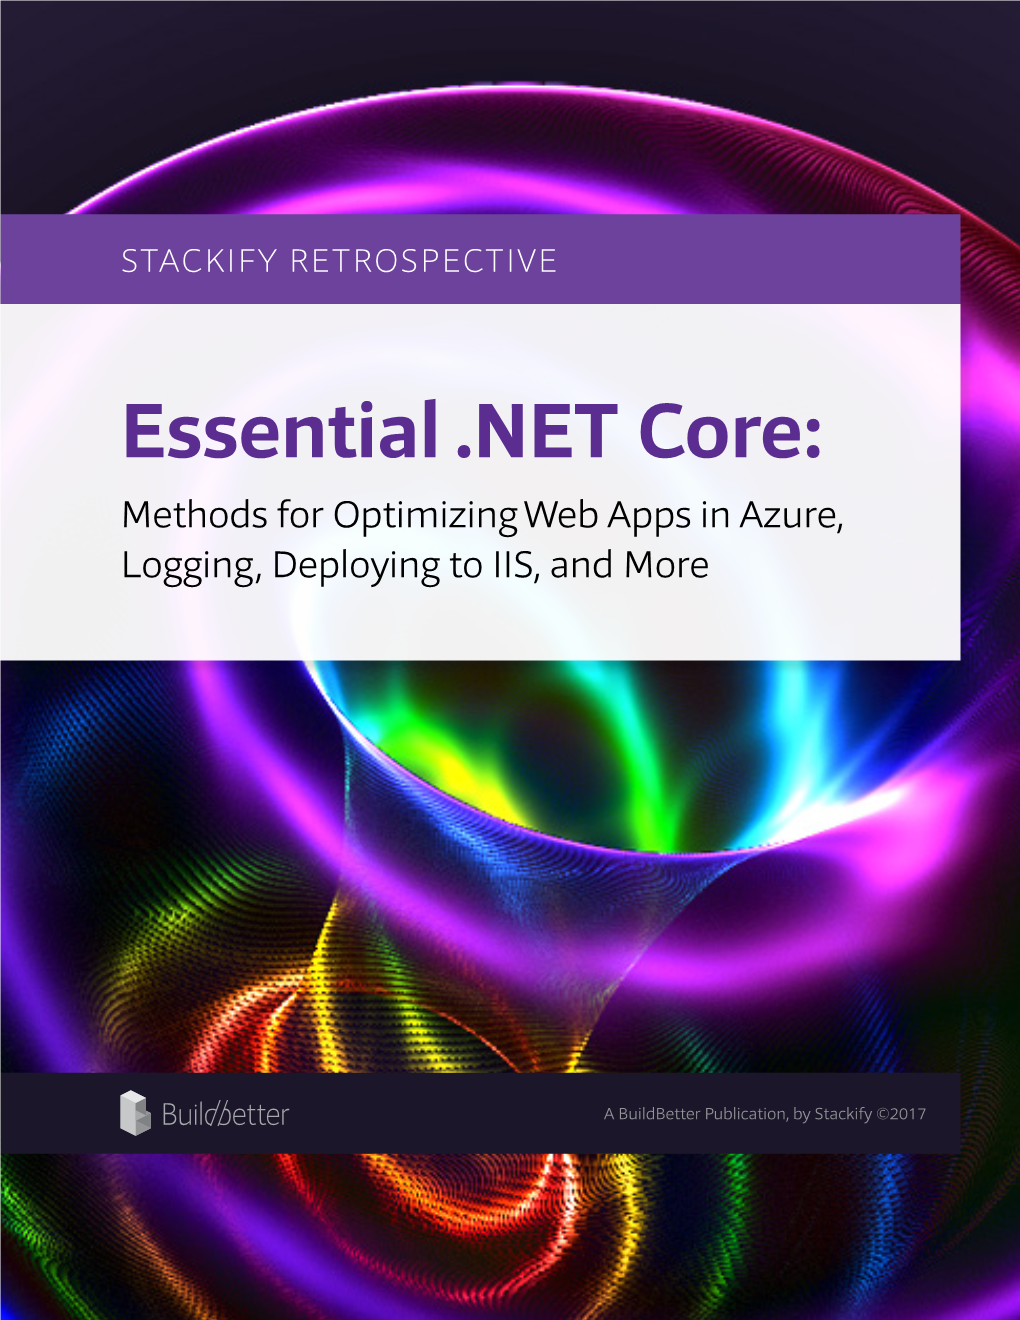 Essential .NET Core: Methods for Optimizing Web Apps in Azure, Logging, Deploying to IIS, and More